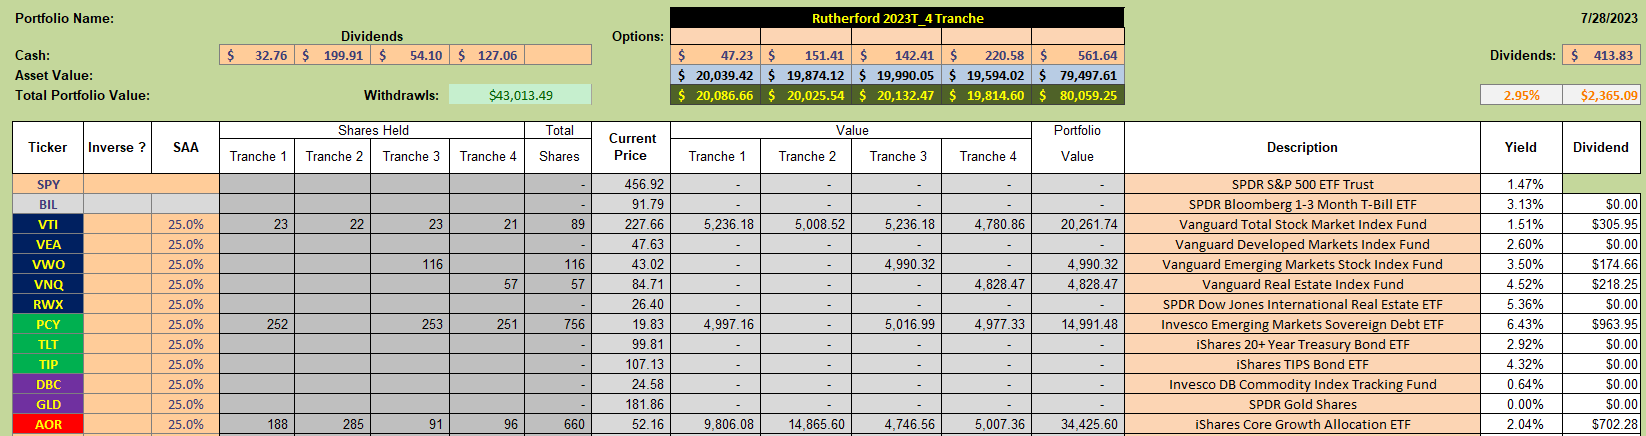 Rutherford Portfolio Review (Tranche 1): 28 July 2023 4